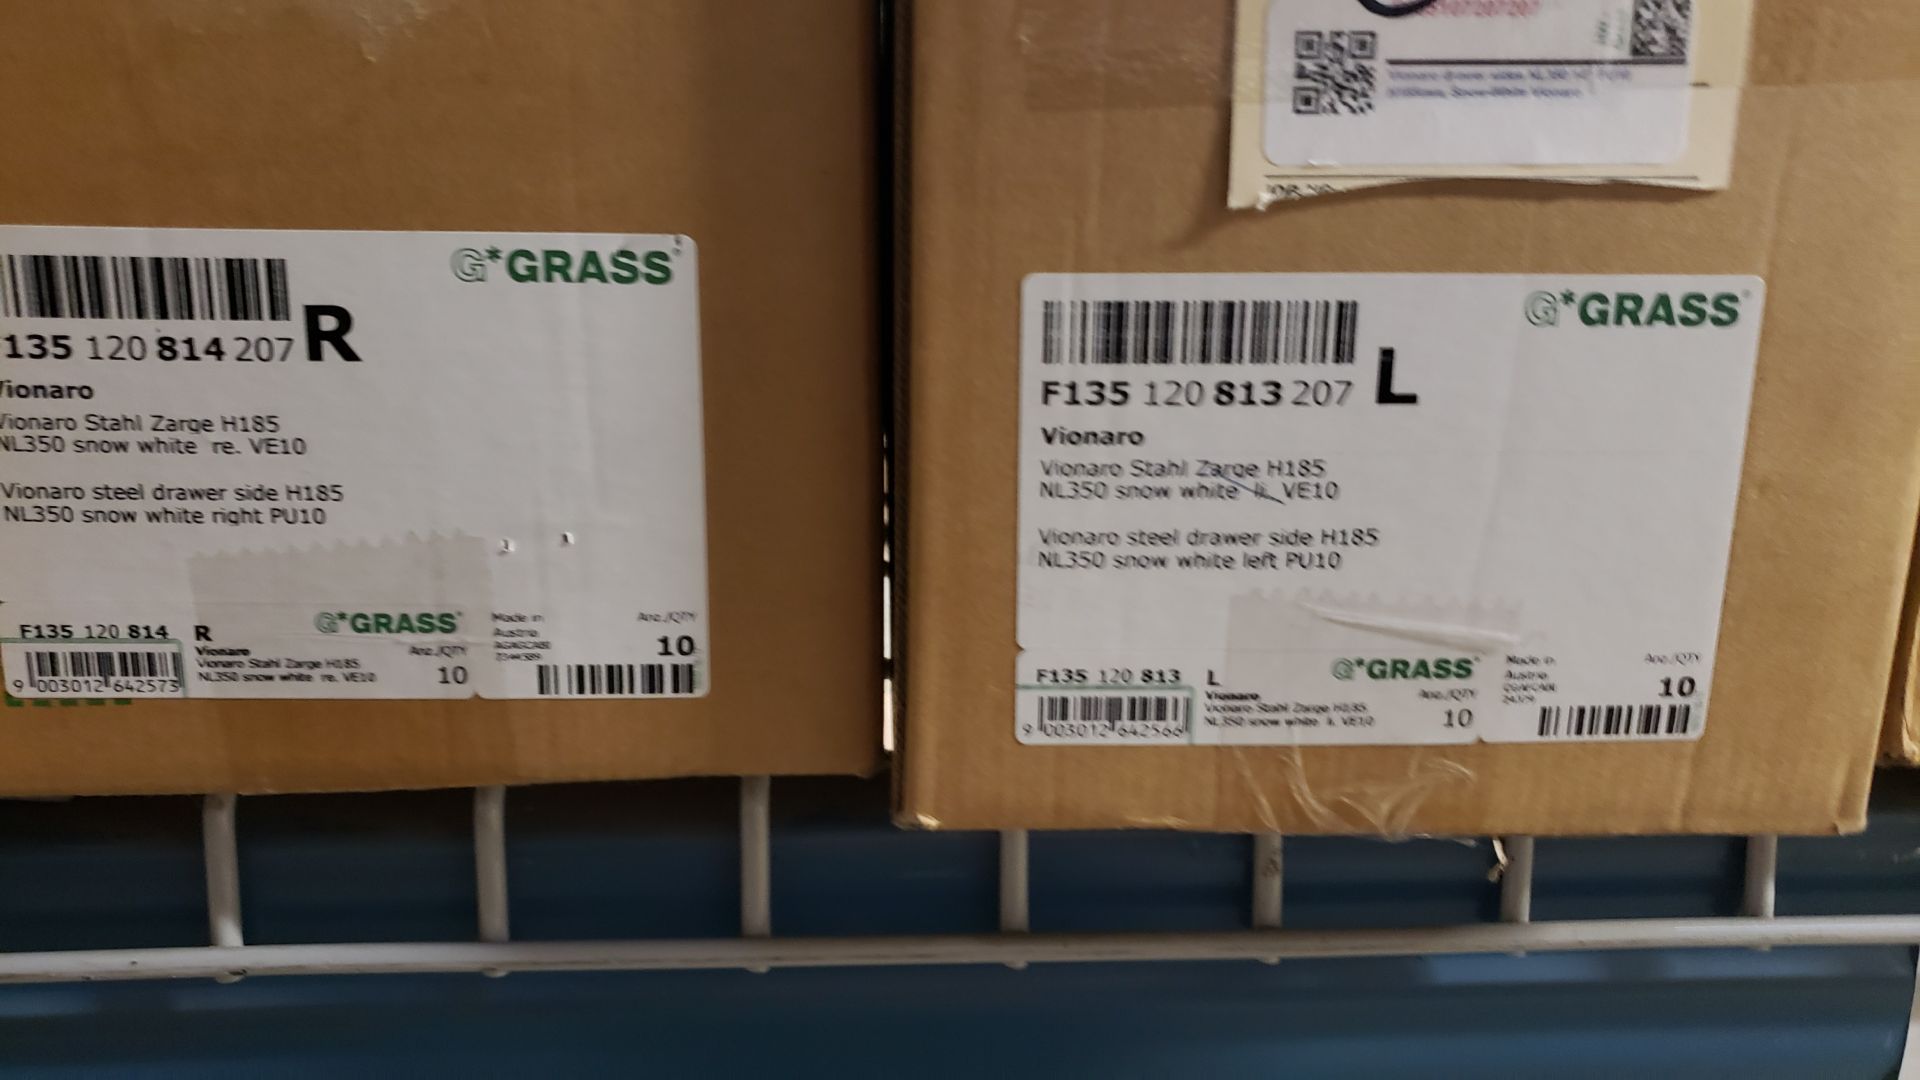 LOT BOXES OF GRASS VIONARO STEEL DRAWER SIDE H185 NL350 SNOW WHITE, RIGHT AND LEFT PU10 HARDWARE ( - Image 3 of 3